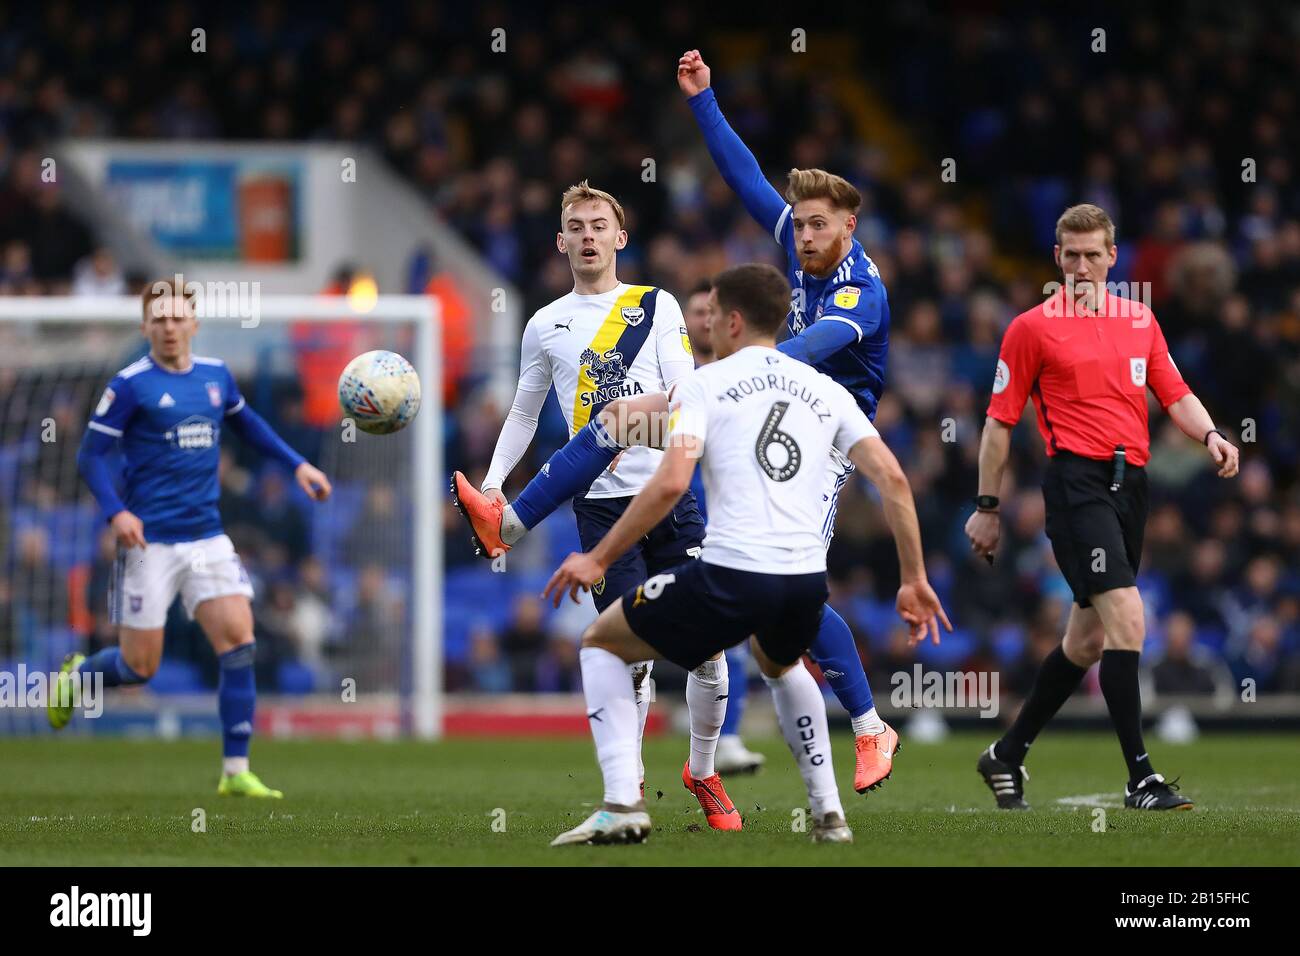 Teddy Bishop of Ipswich Town battles with Mark Sykes and Alex Gorrin of Oxford United - Ipswich Town v Oxford United, Sky Bet League One, Portman Road, Ipswich, UK - 22nd February 2020  Editorial Use Only - DataCo restrictions apply Stock Photo